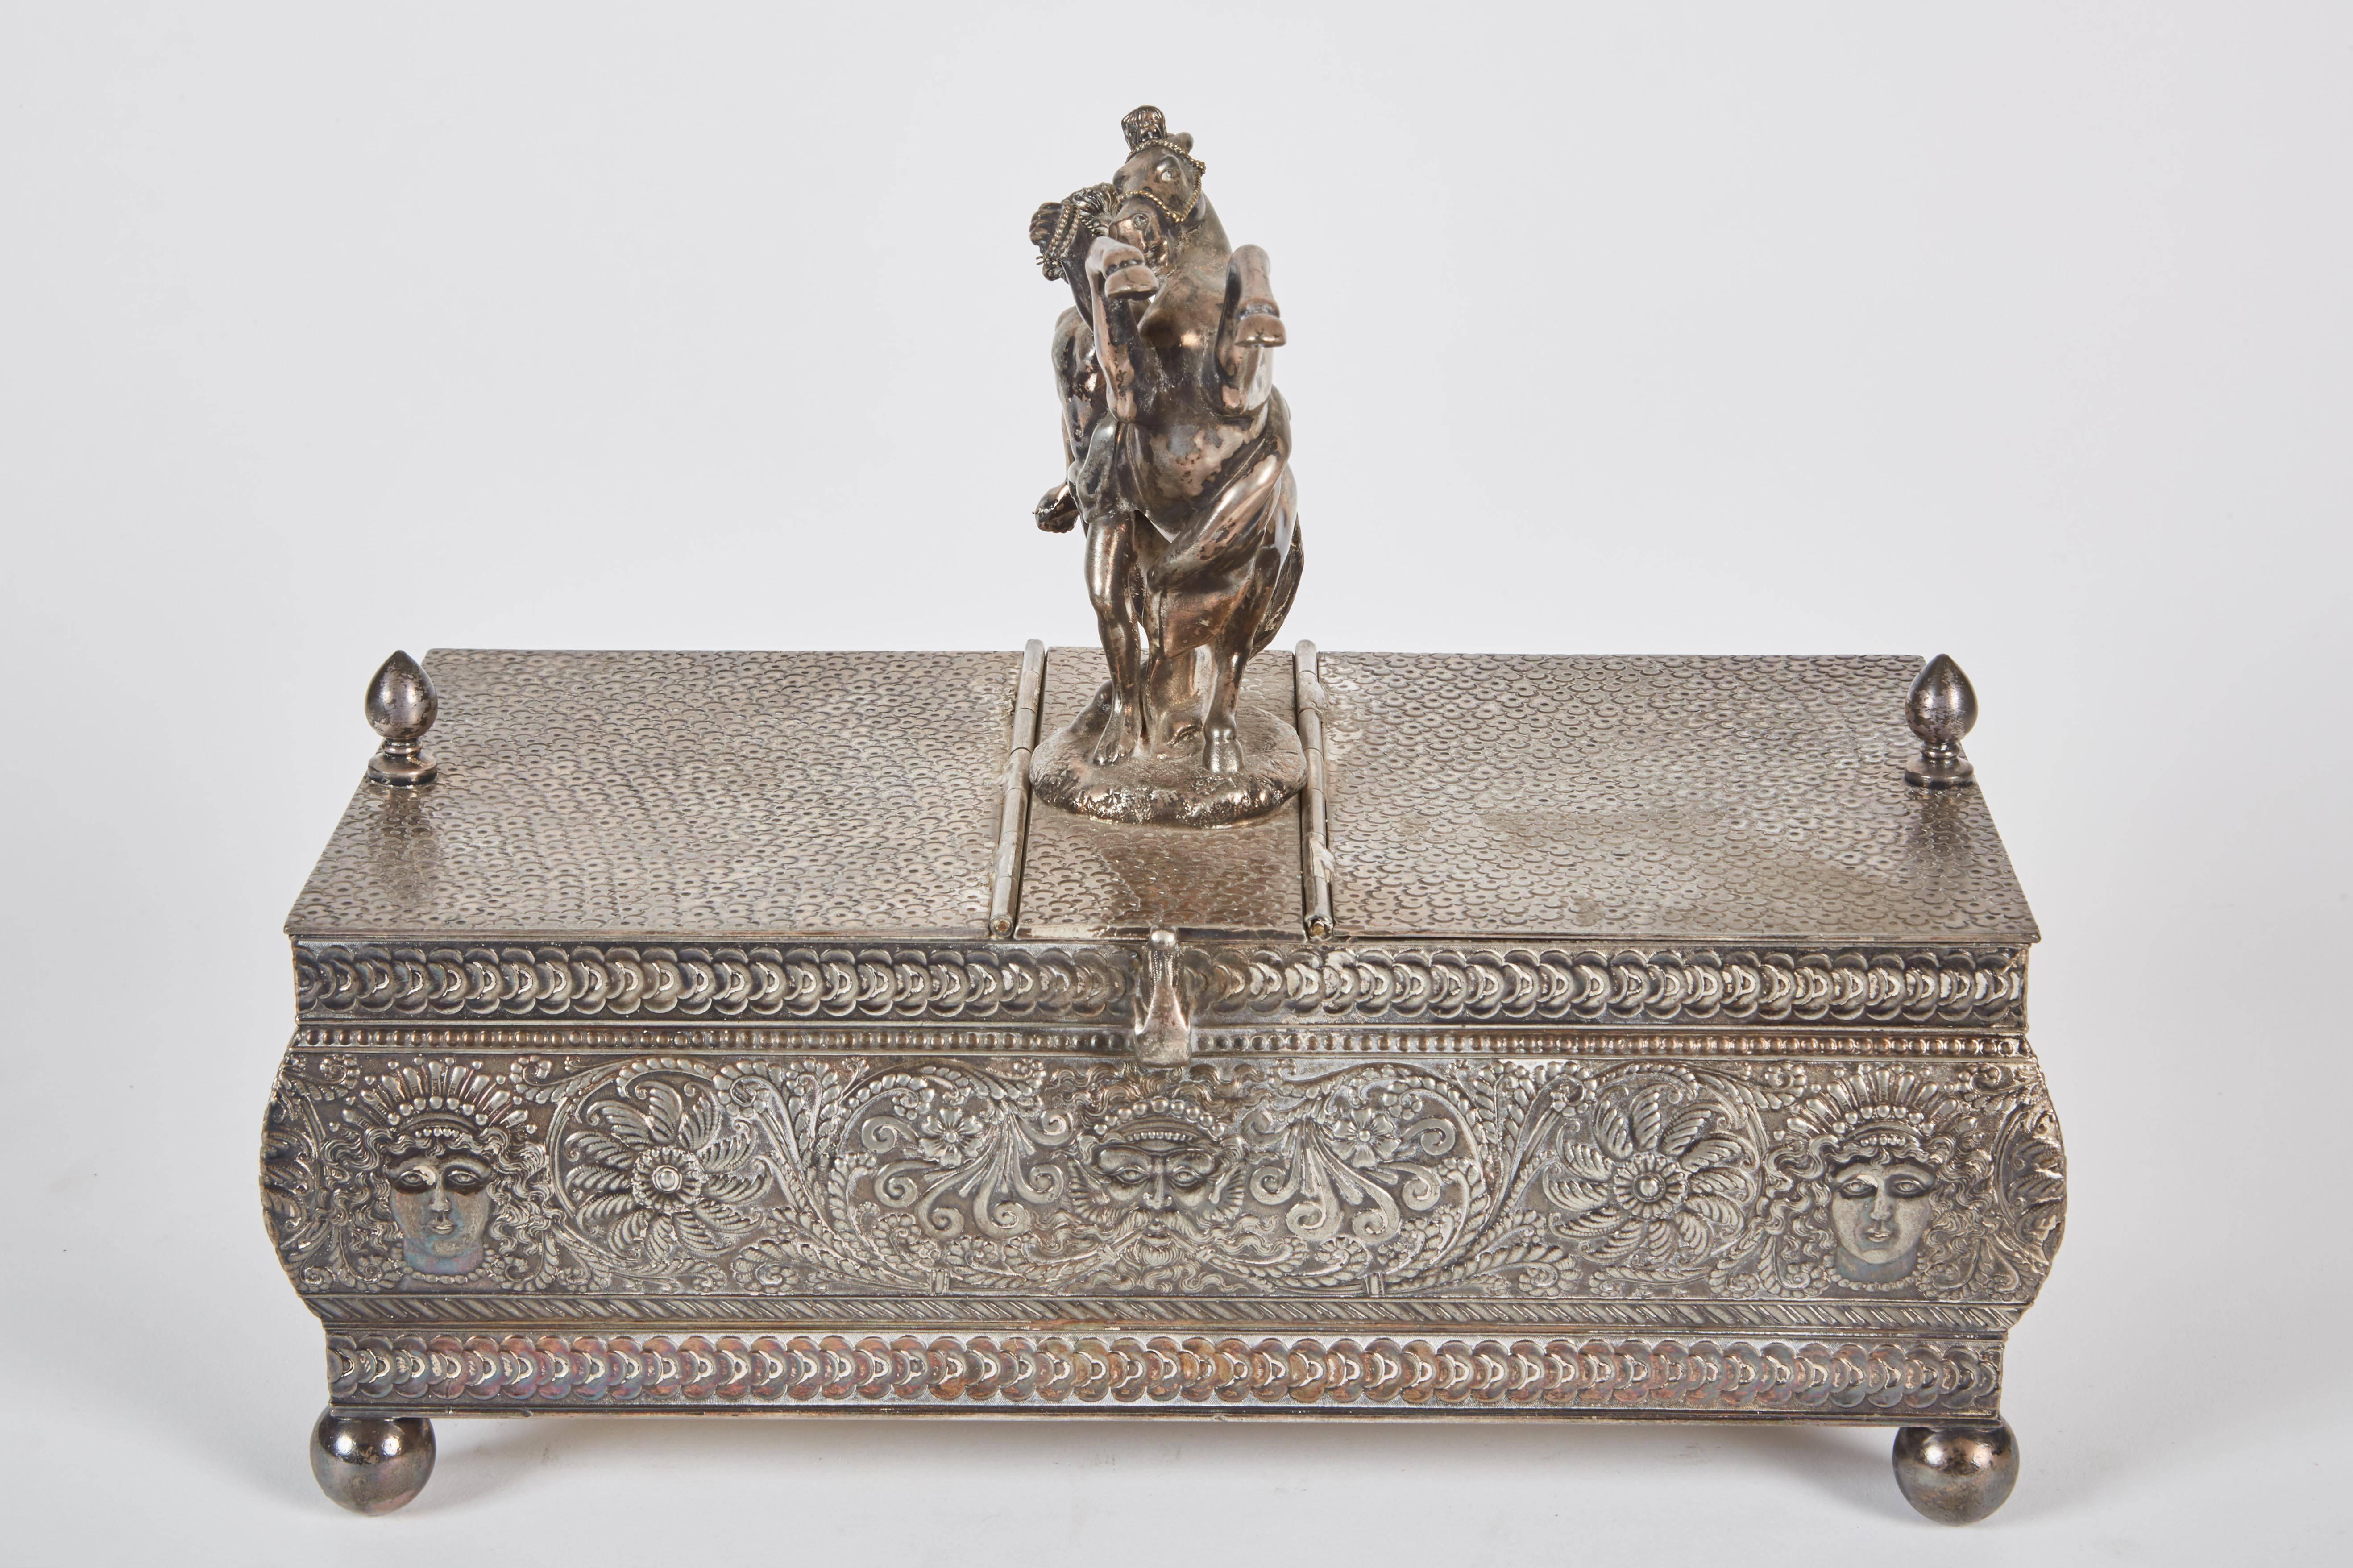 A fine 19th century Italian silver plated humidor with etched foliage motifs throughout the humidor with a warrior and horse figures. There are two cigar compartments on either side of the figurine.